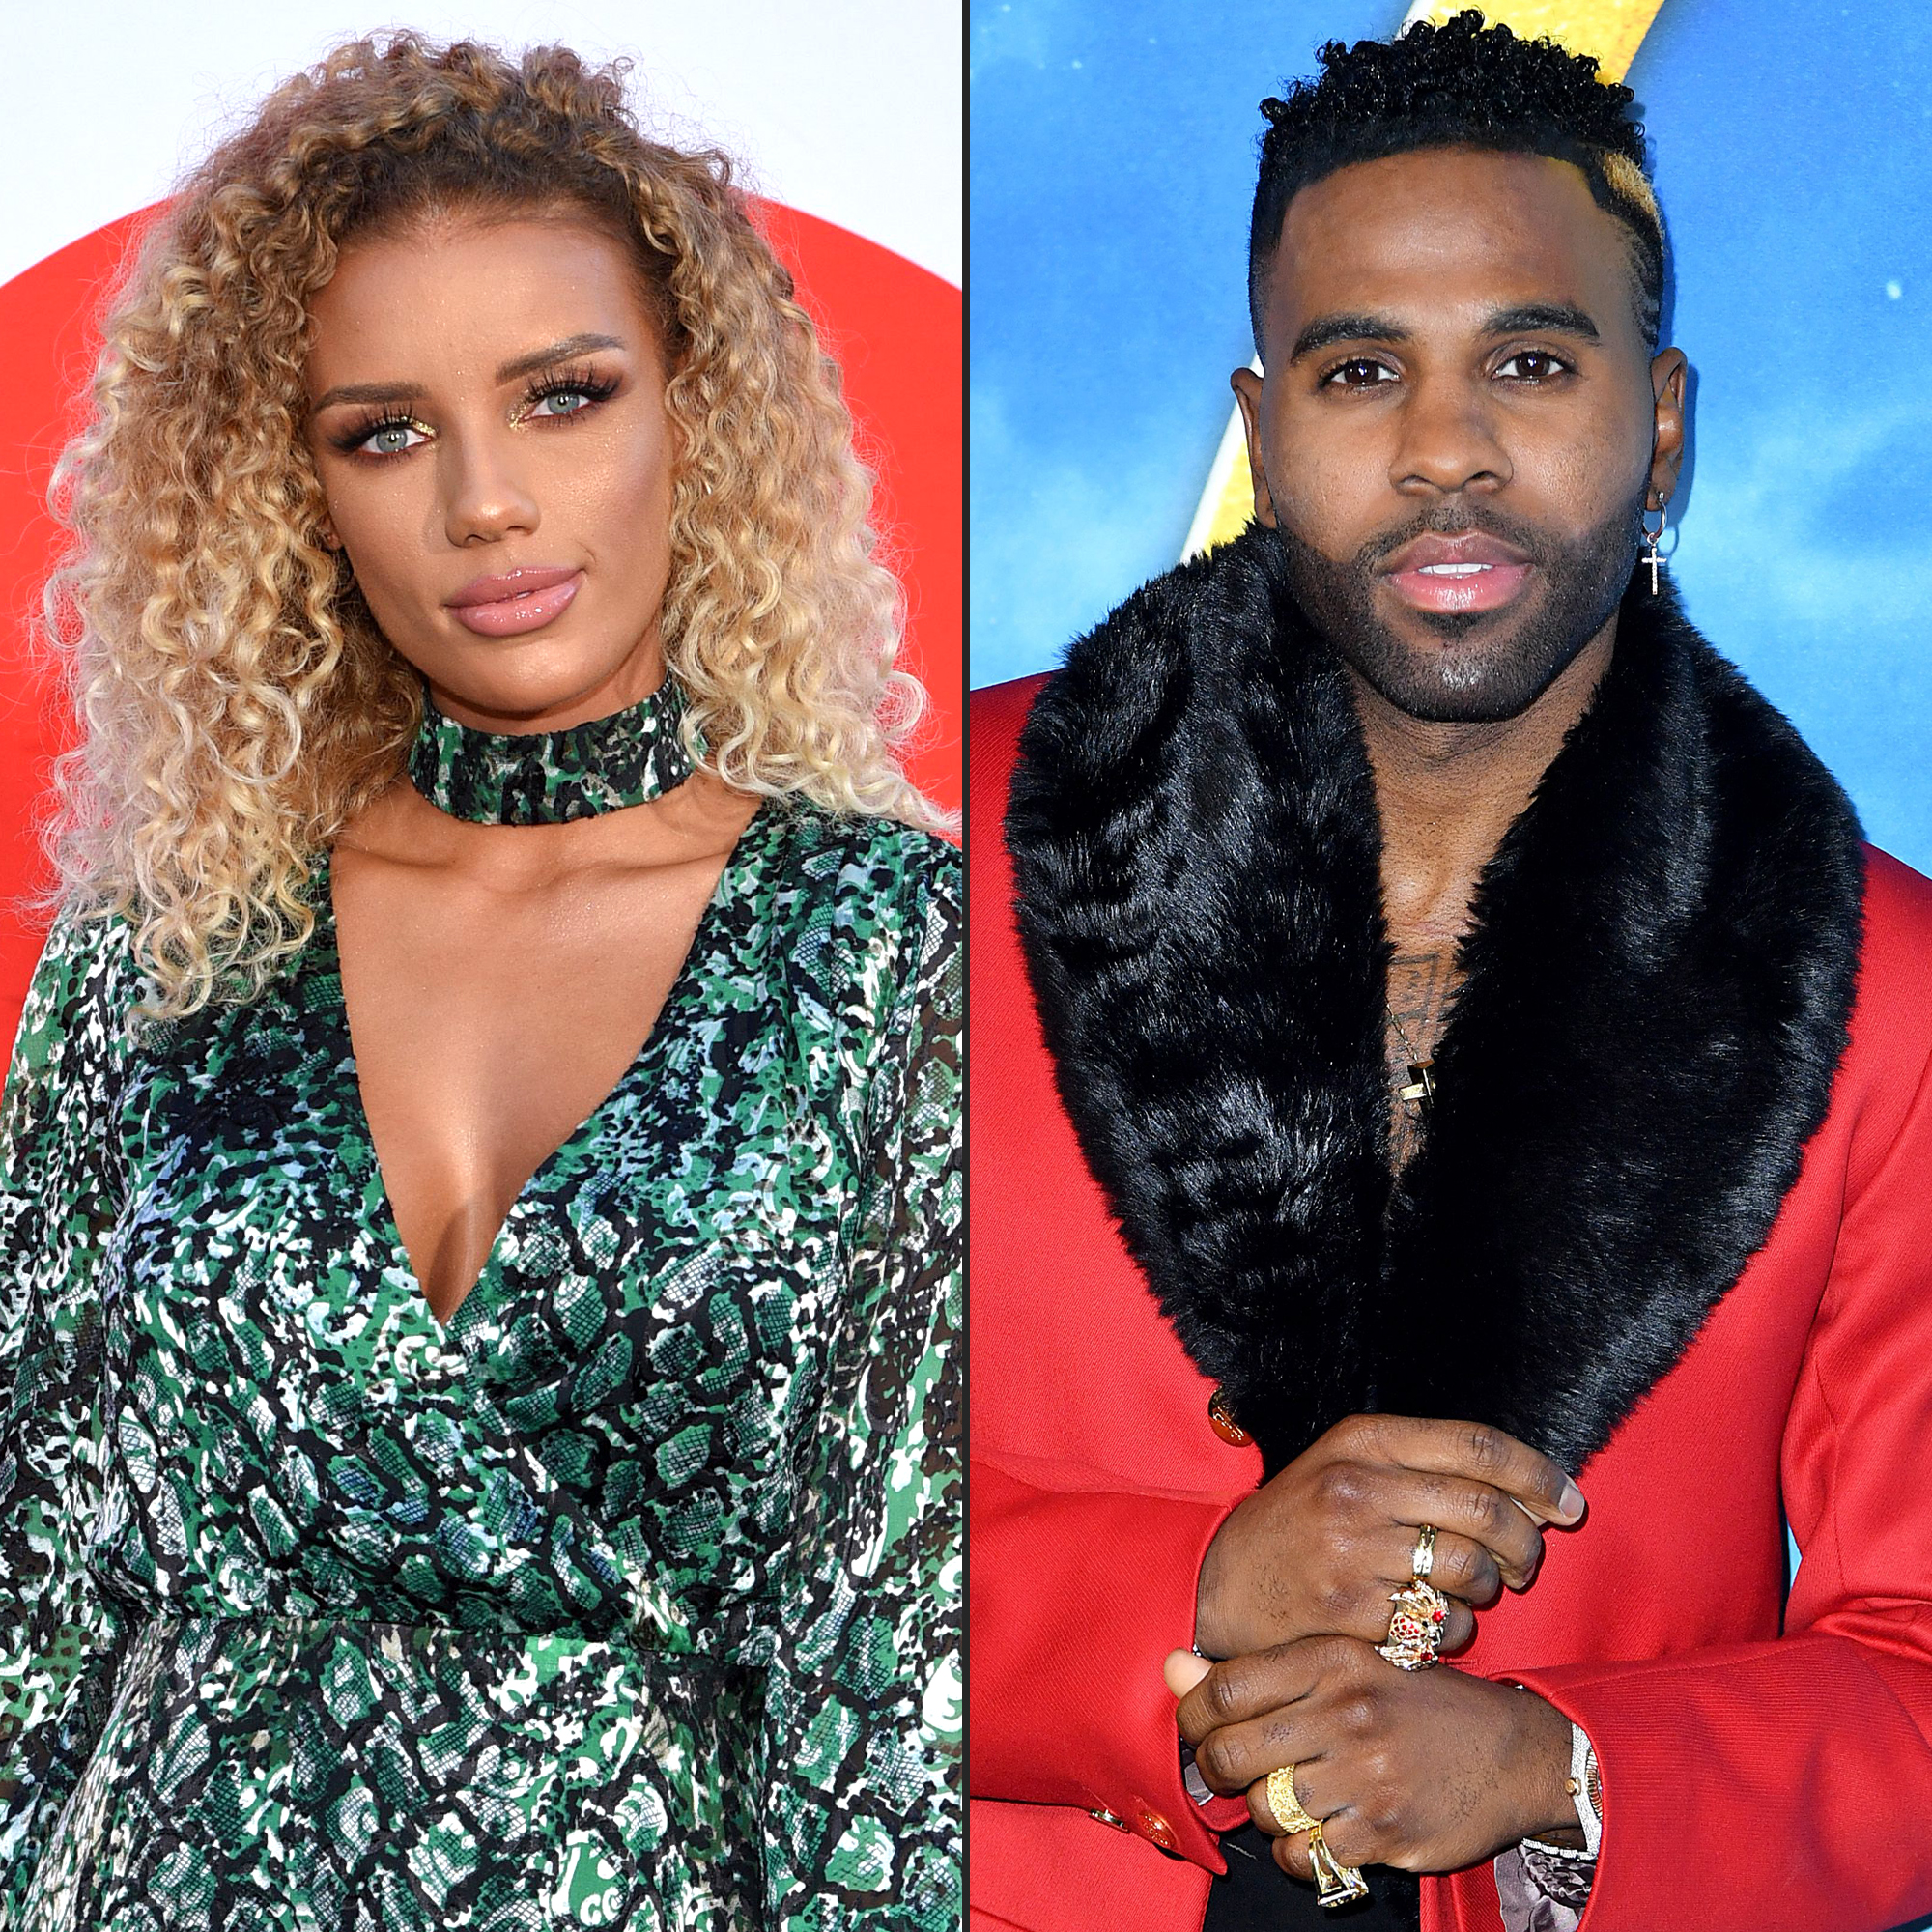 Jena Frumes Claims Jason Derulo Cheated on Her Before Their Split